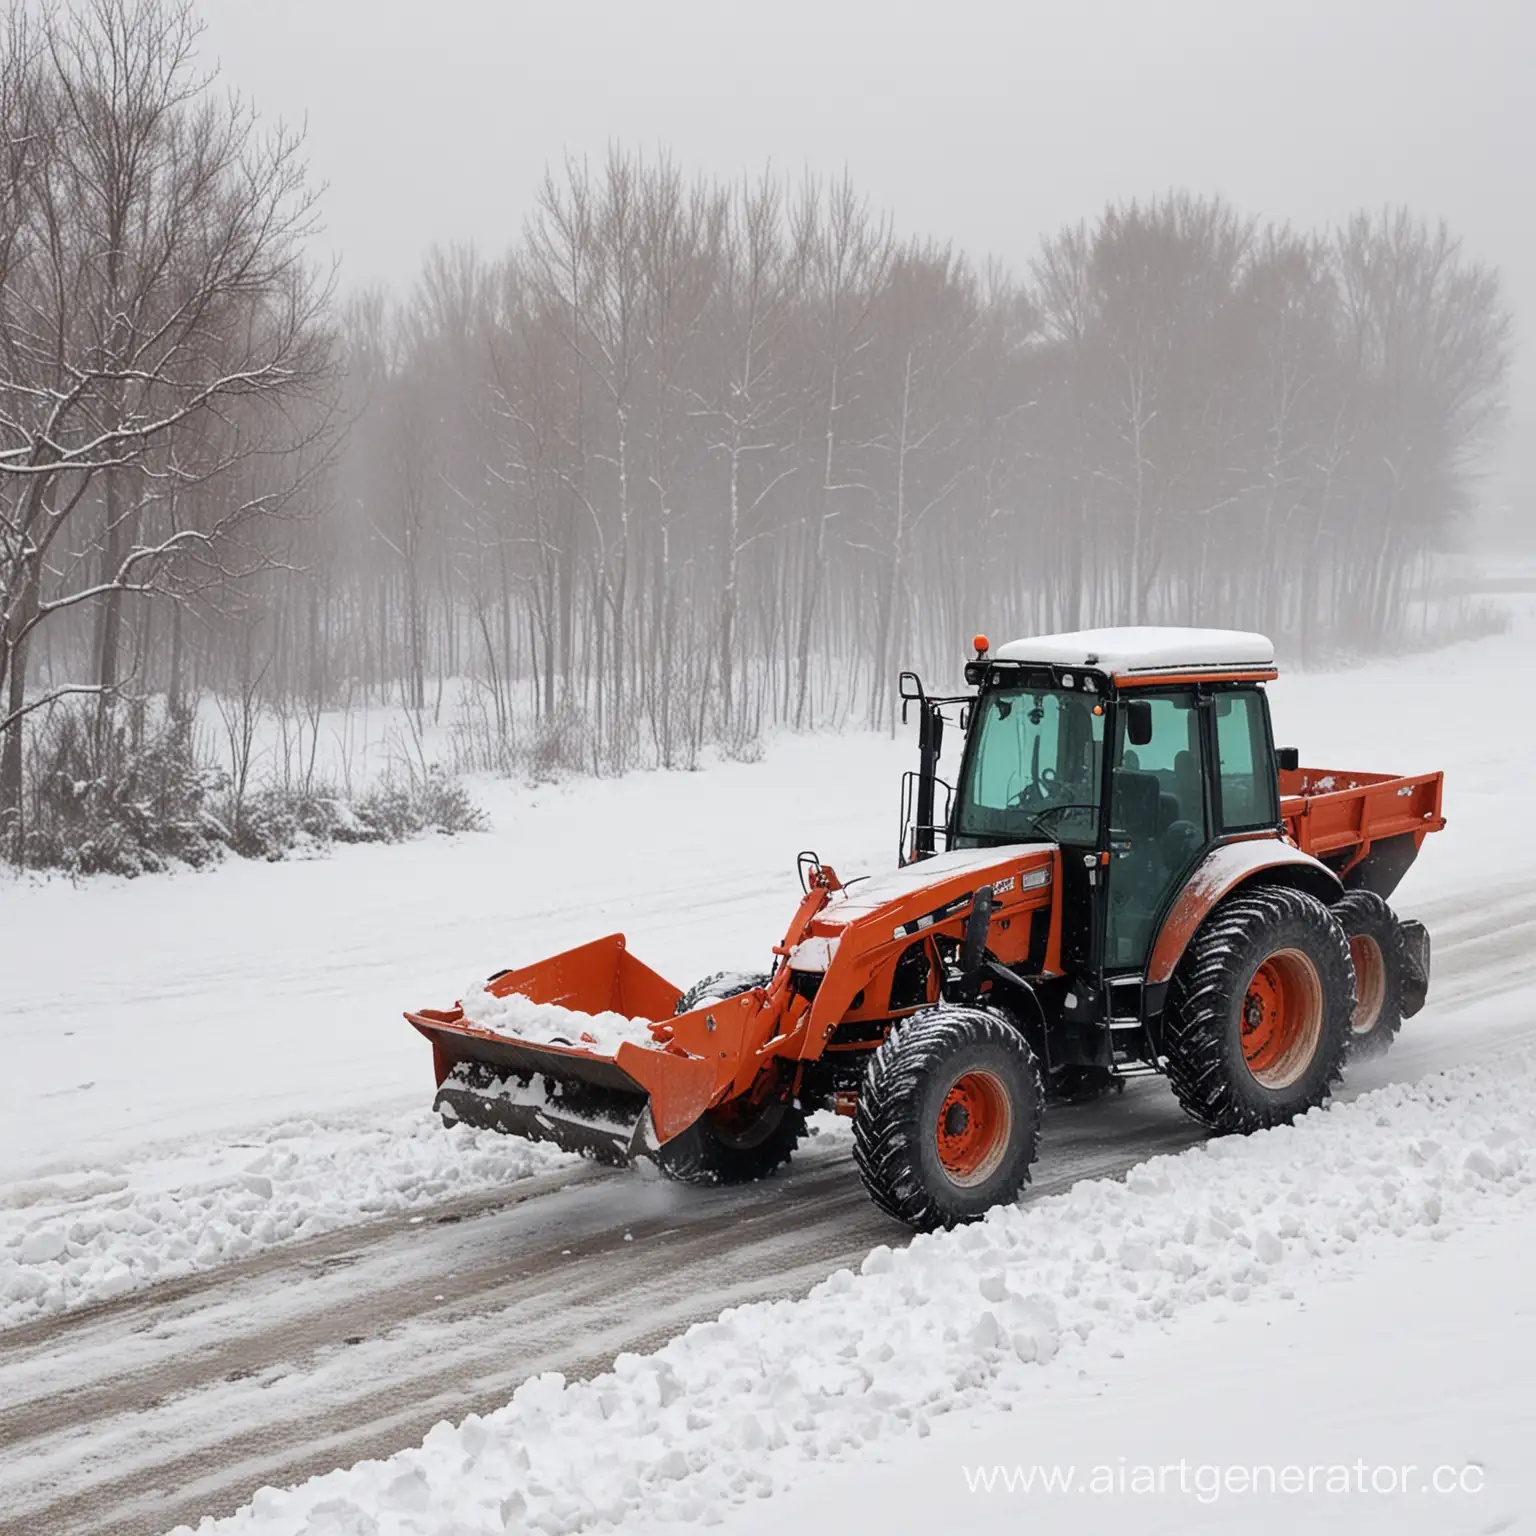 Snow-Removal-in-Moscow-Tractor-and-Dump-Truck-Clearing-Territory